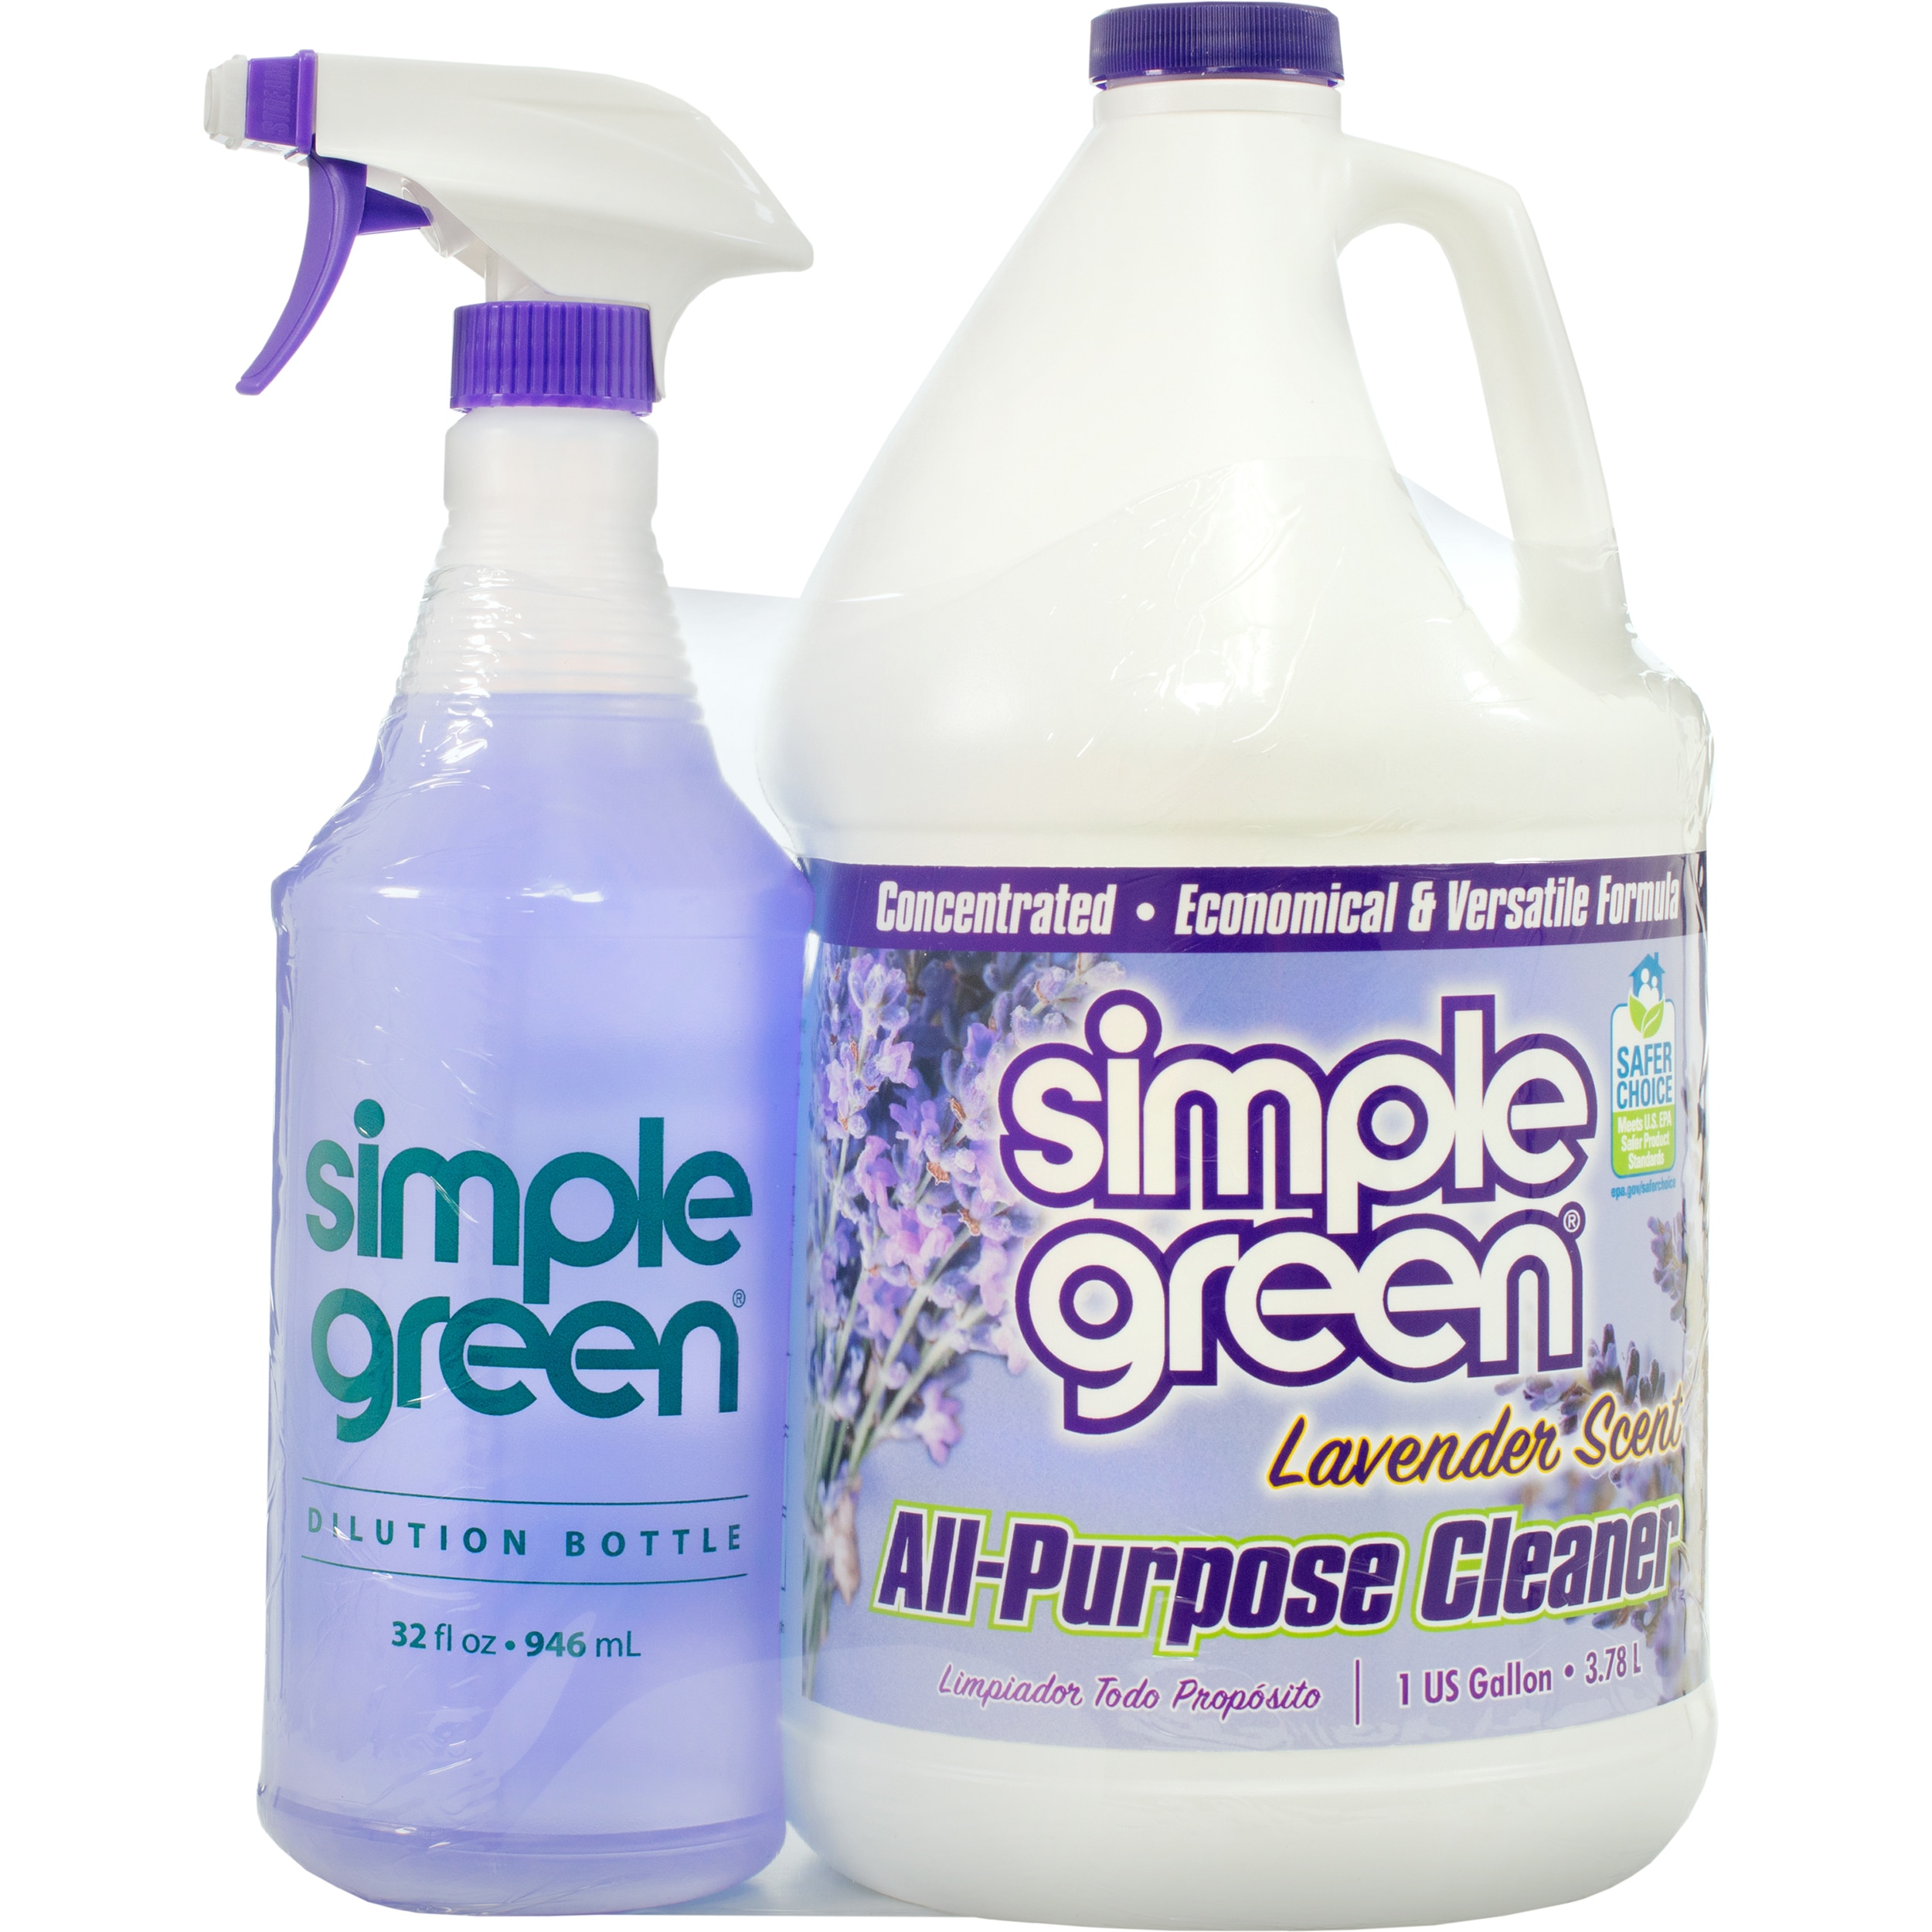 Lavender Natural All-Purpose Cleaner, 32 Ounce